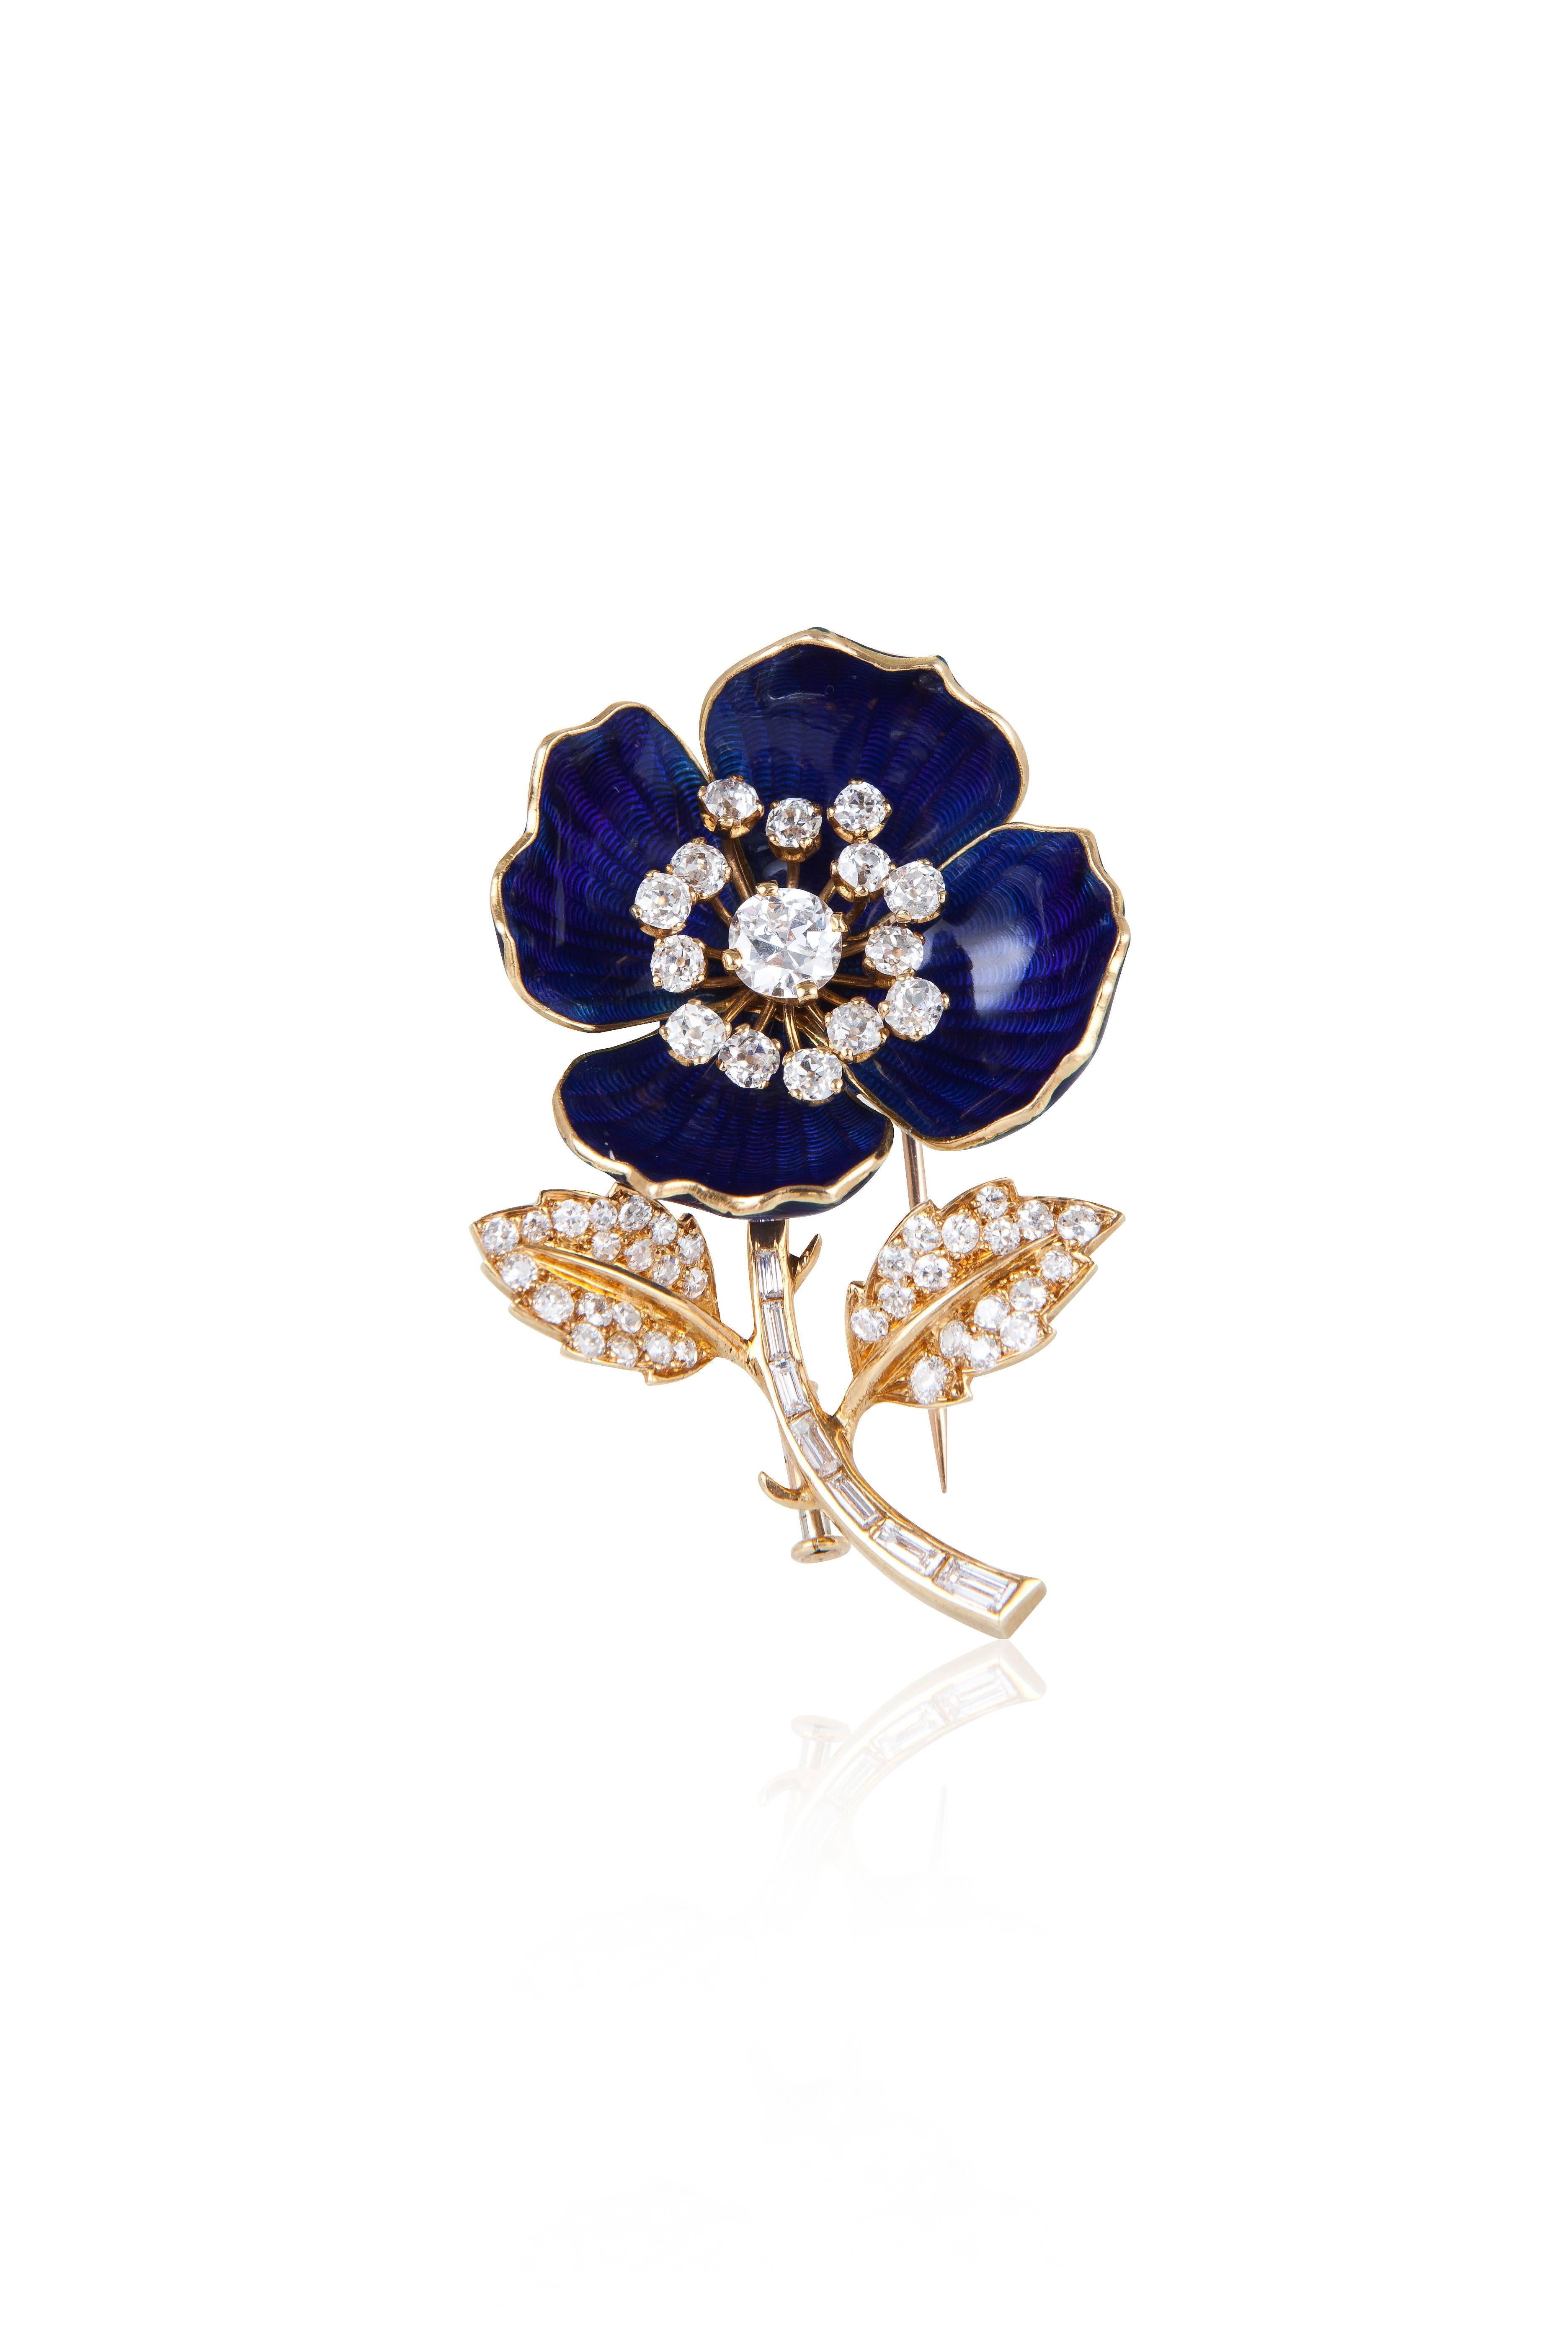 Exceptionally crafted, this pin comes with two separate sets of petals that can be easily swapped depending on one’s mood.  The first exhibits a subtly patterned royal blue enamel, while the second is more glamorous with pavé set diamonds.  The